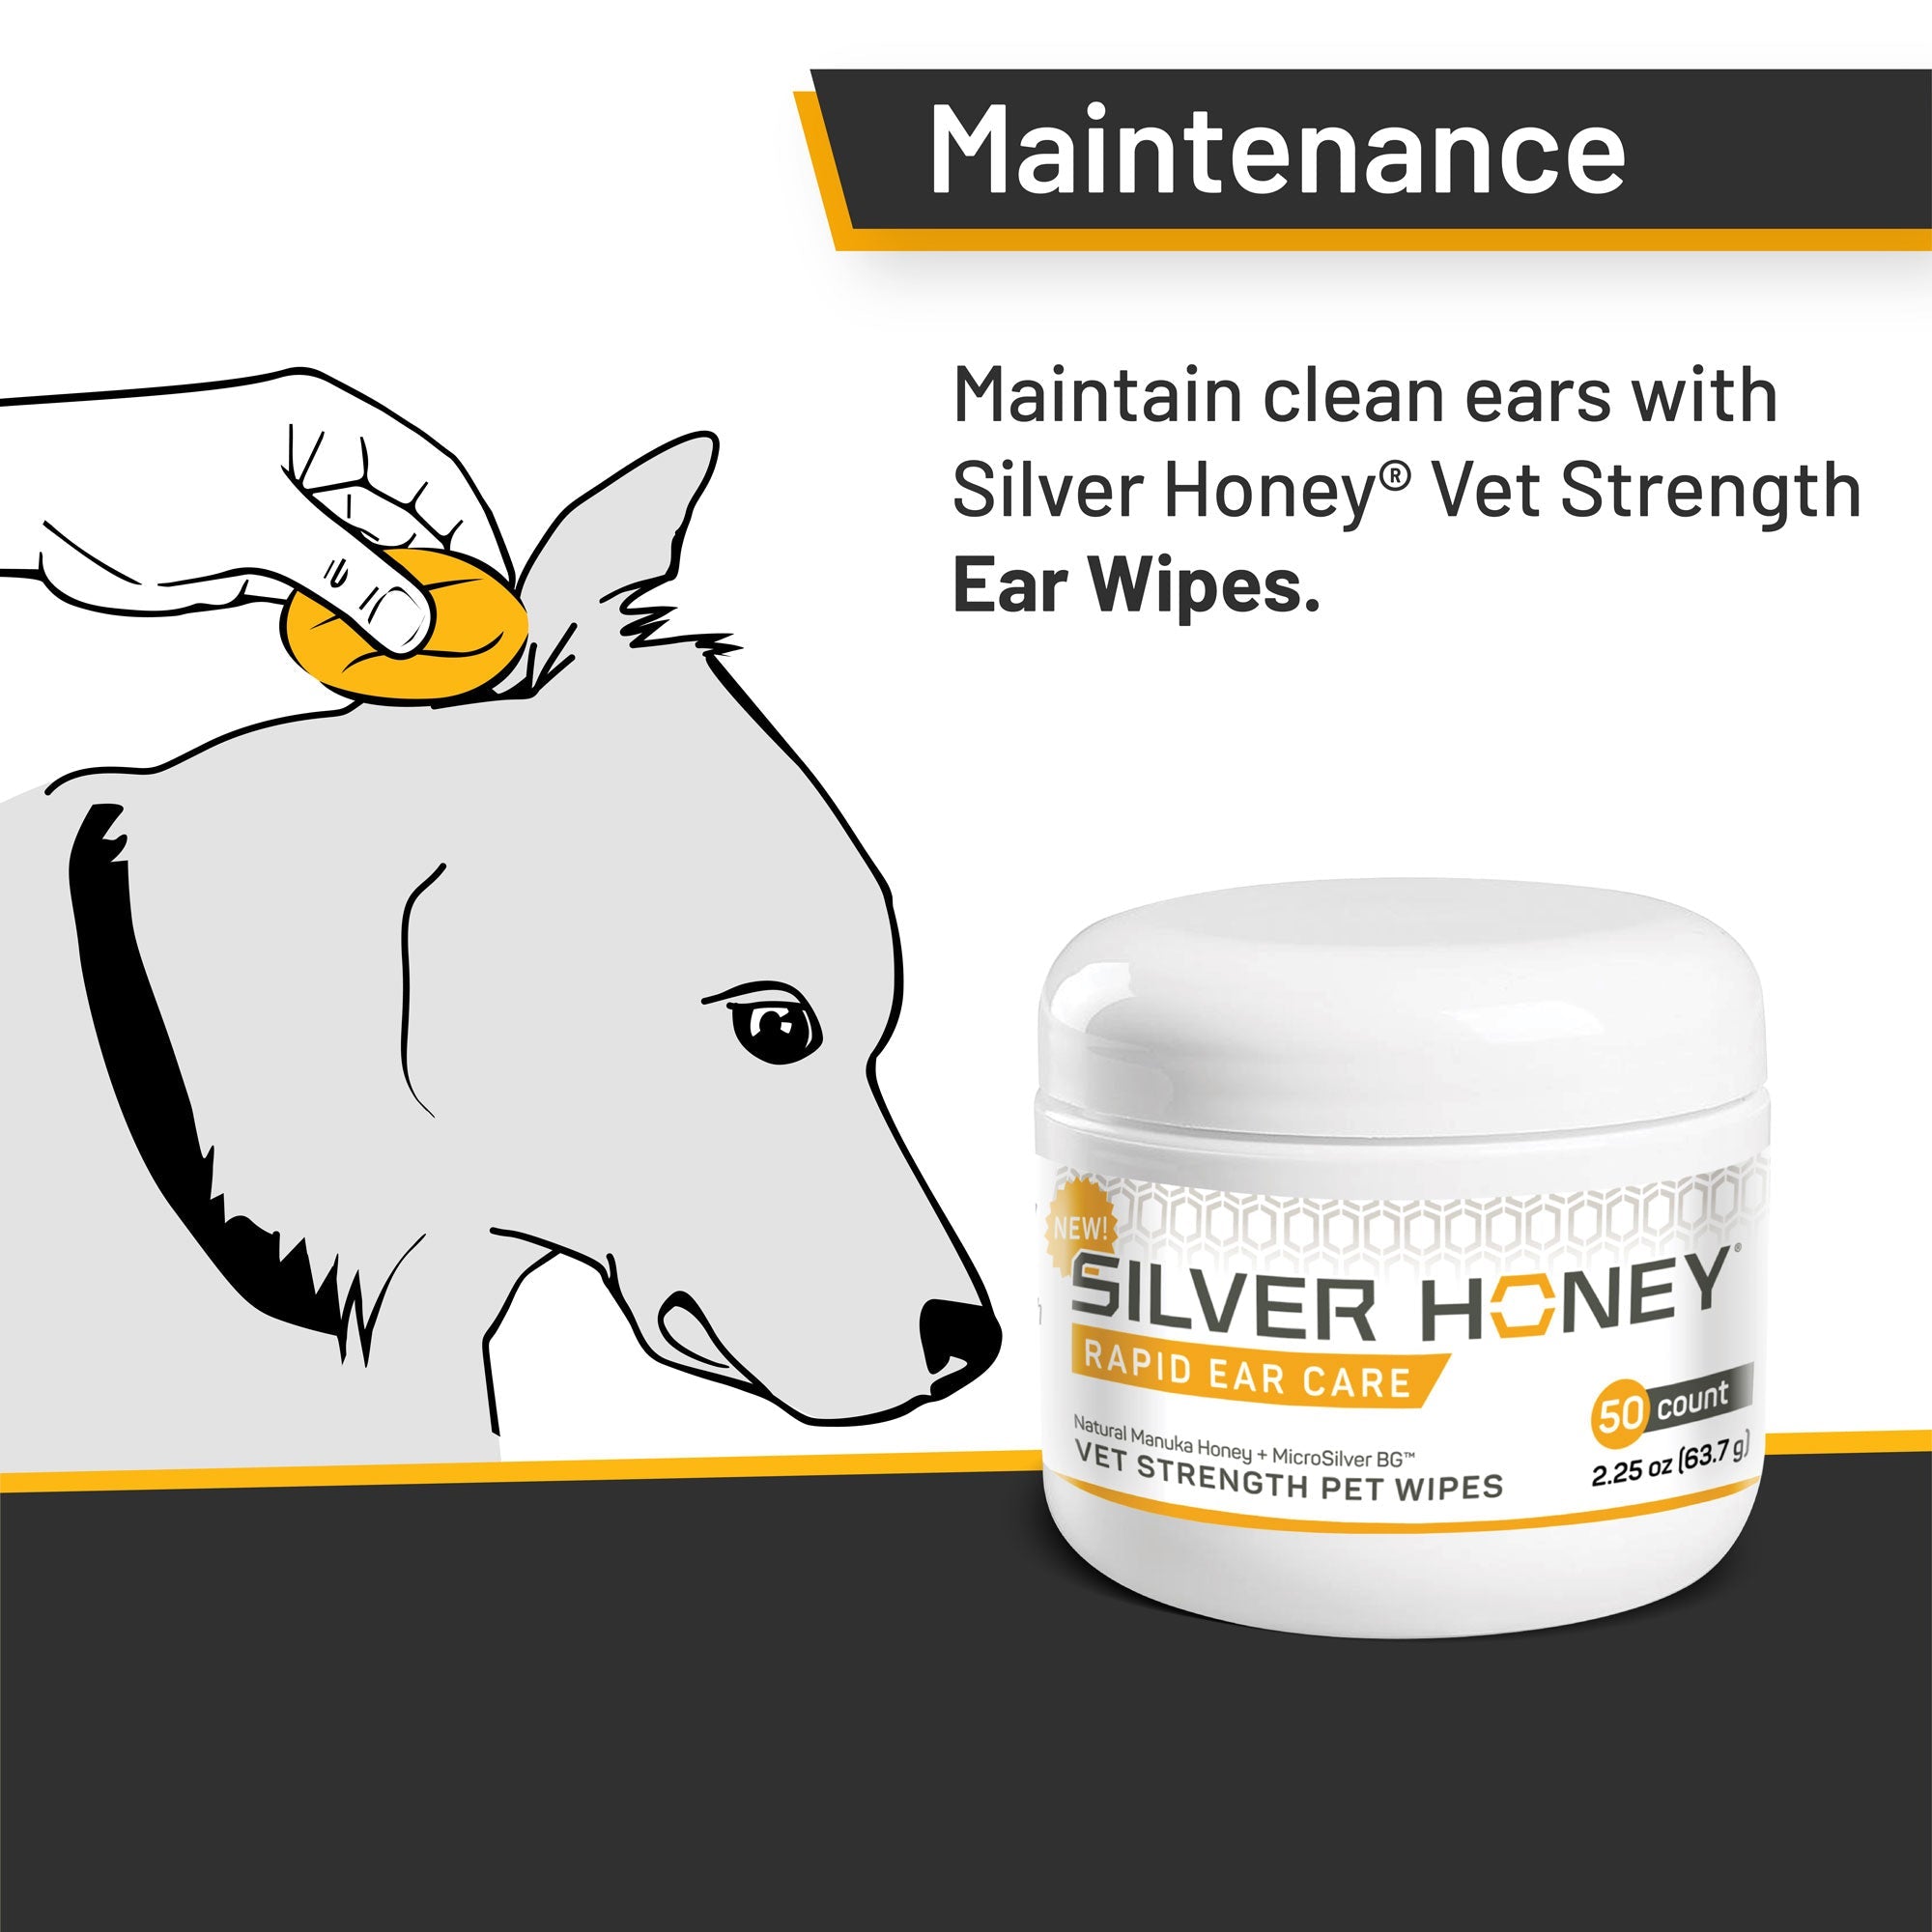 Silver Honey Rapid Ear Care, vet strength pet wipes 50 count. Maintenance of your pets ears, maintain clean ears with Silver Honey vet strength ear wipes.